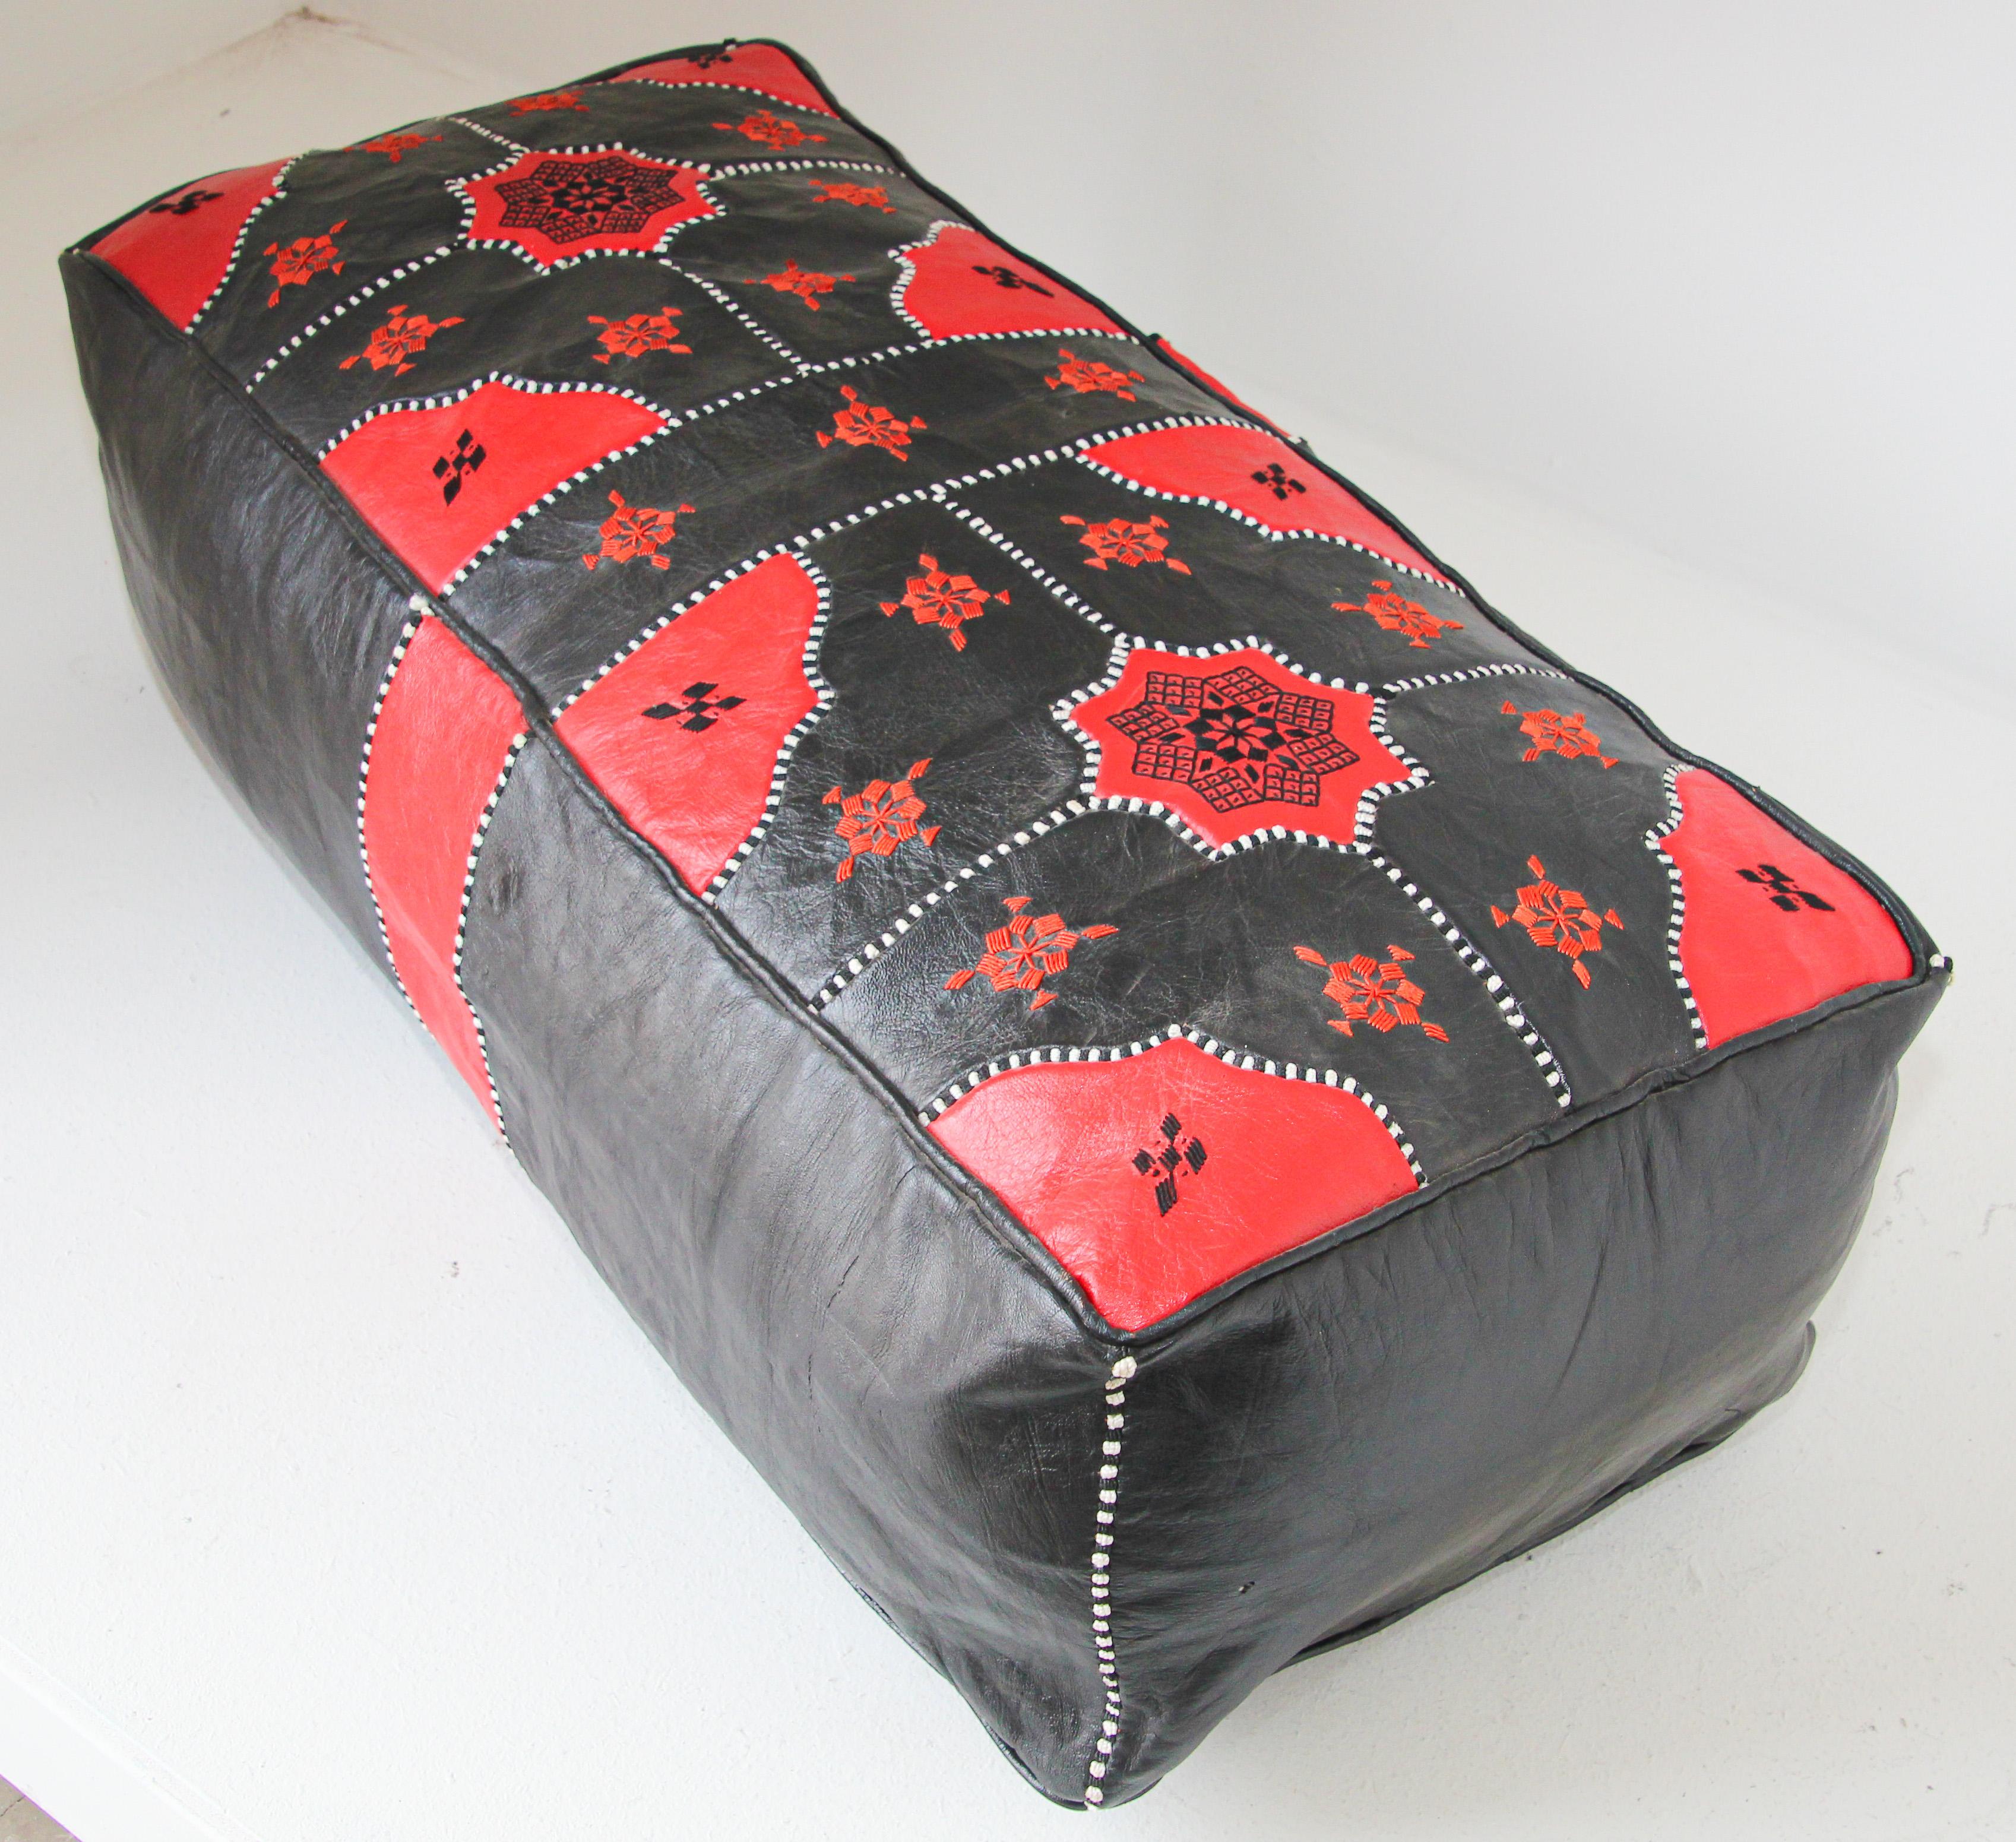 Vintage Moroccan Leather Rectangular Pouf in Red and Black For Sale 8